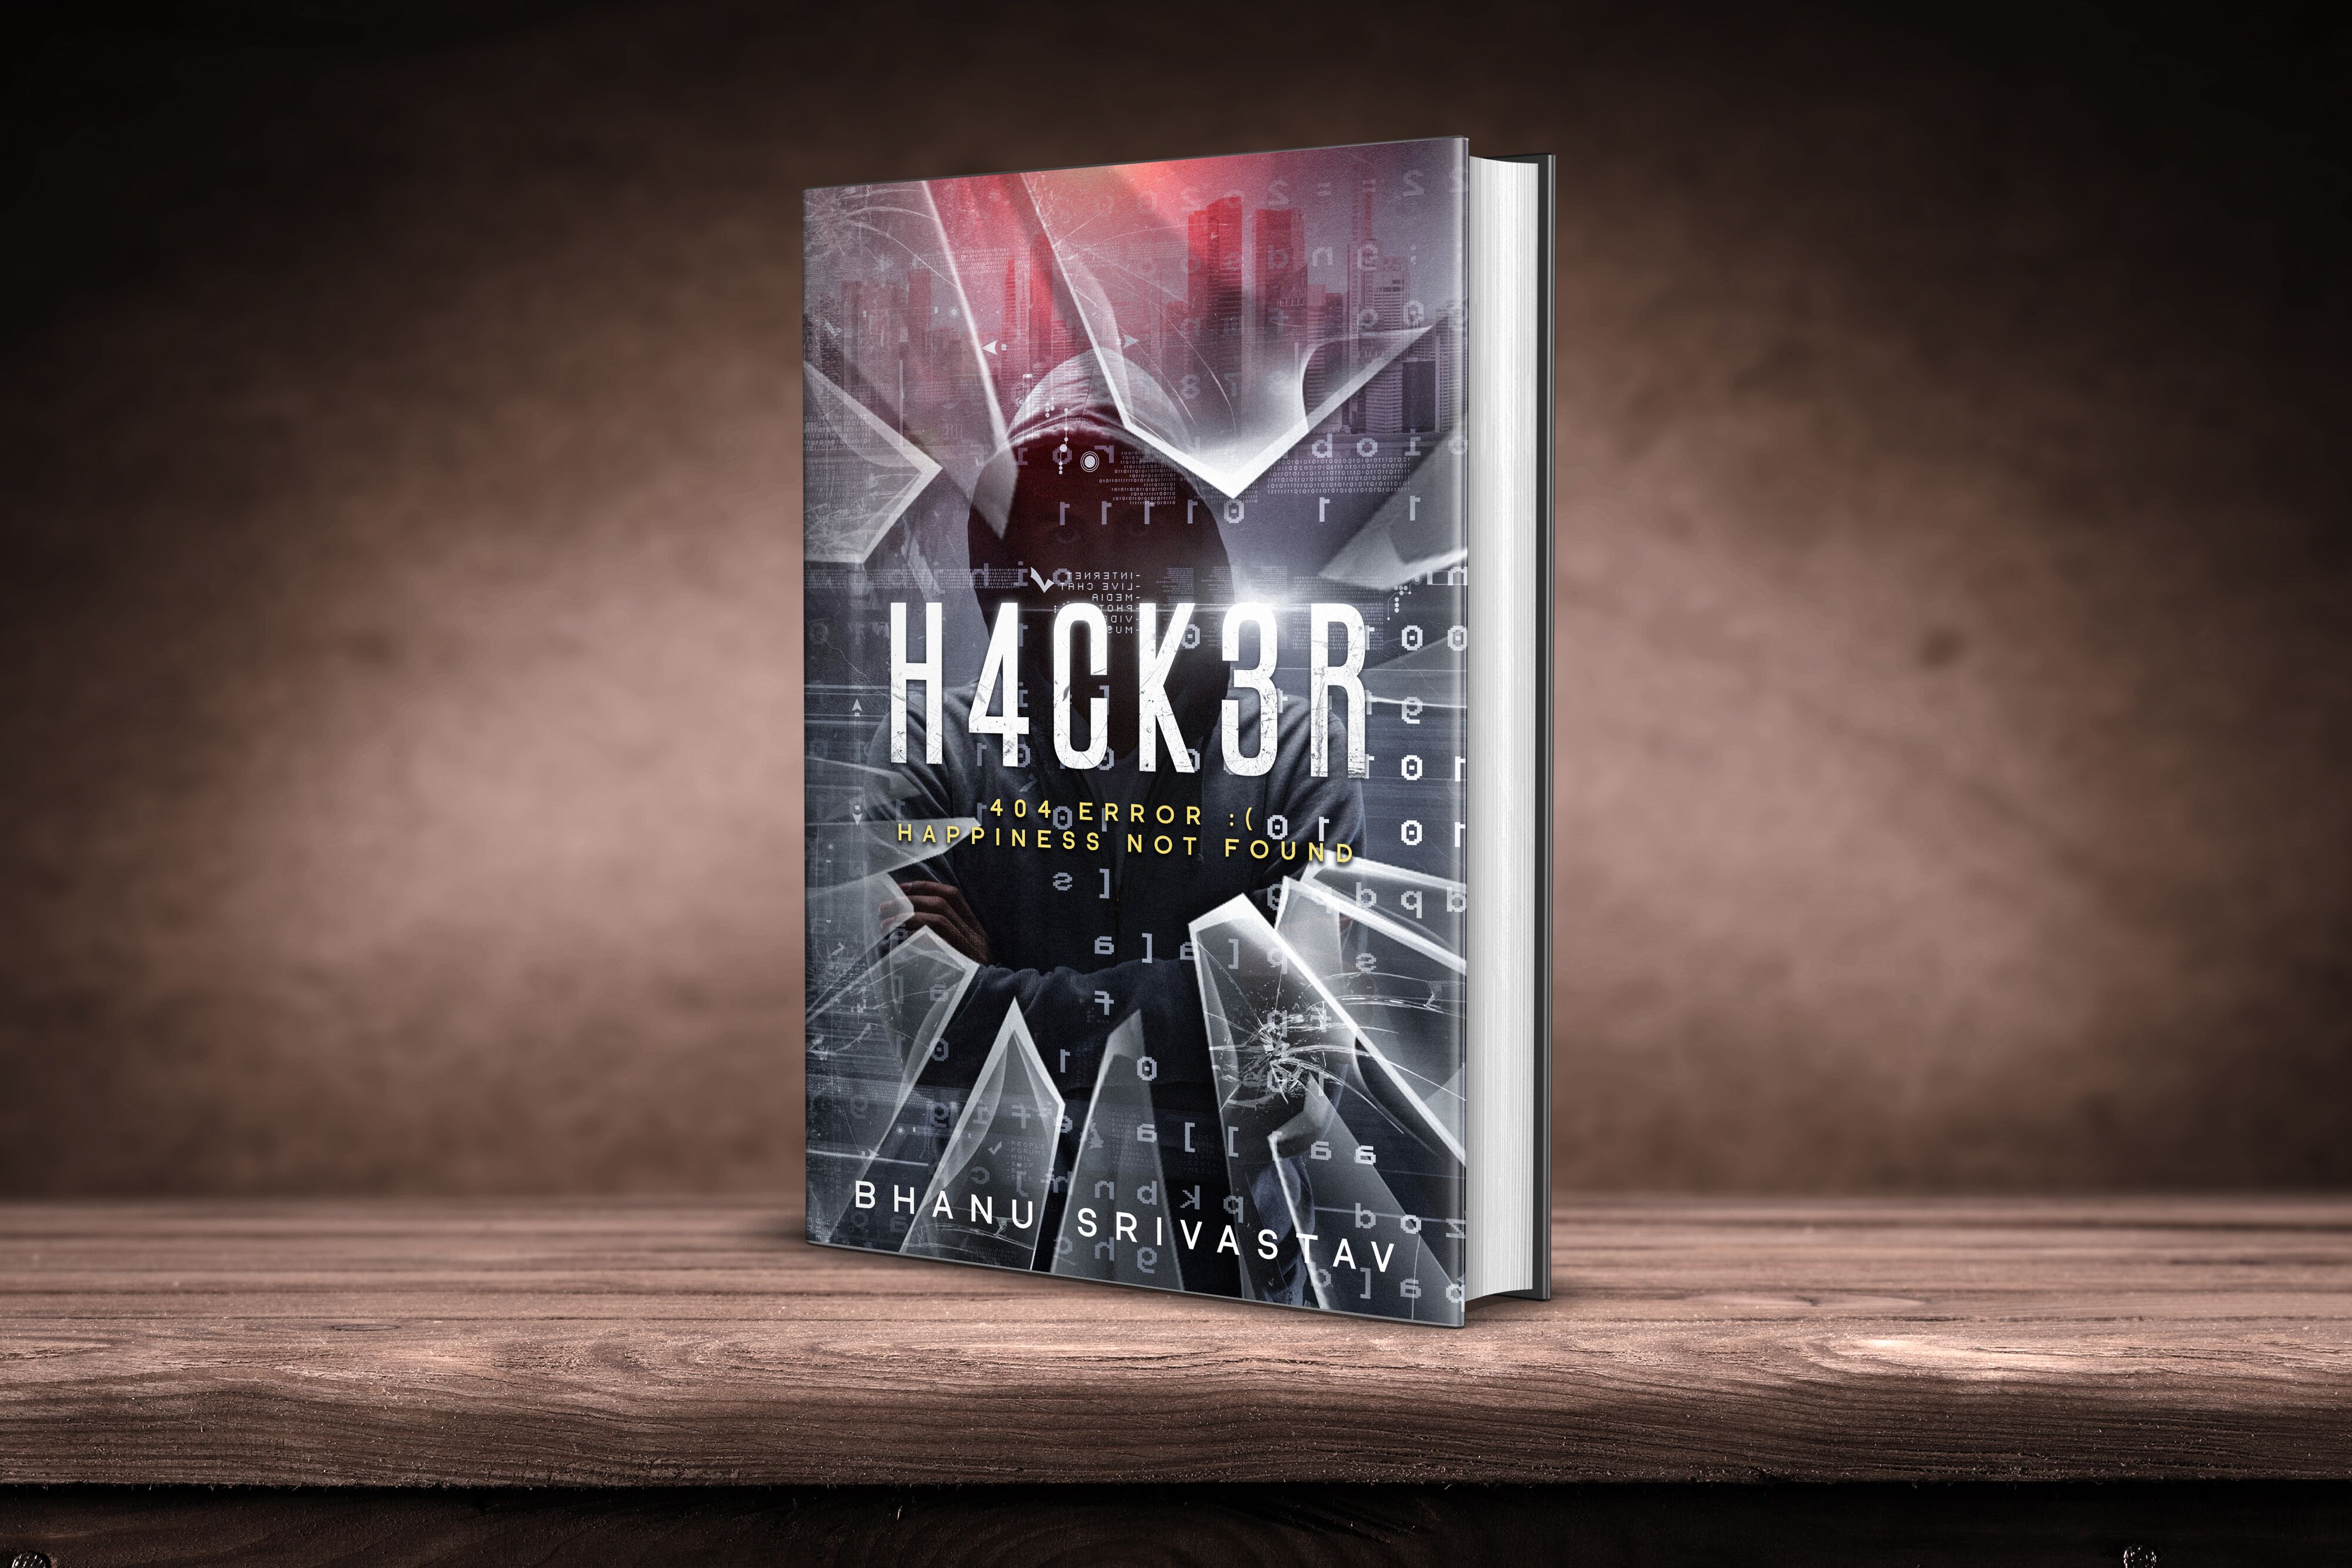 HACKER 404 Error Happiness not Found by Bhanu Srivastav becomes fastest bestseller in India